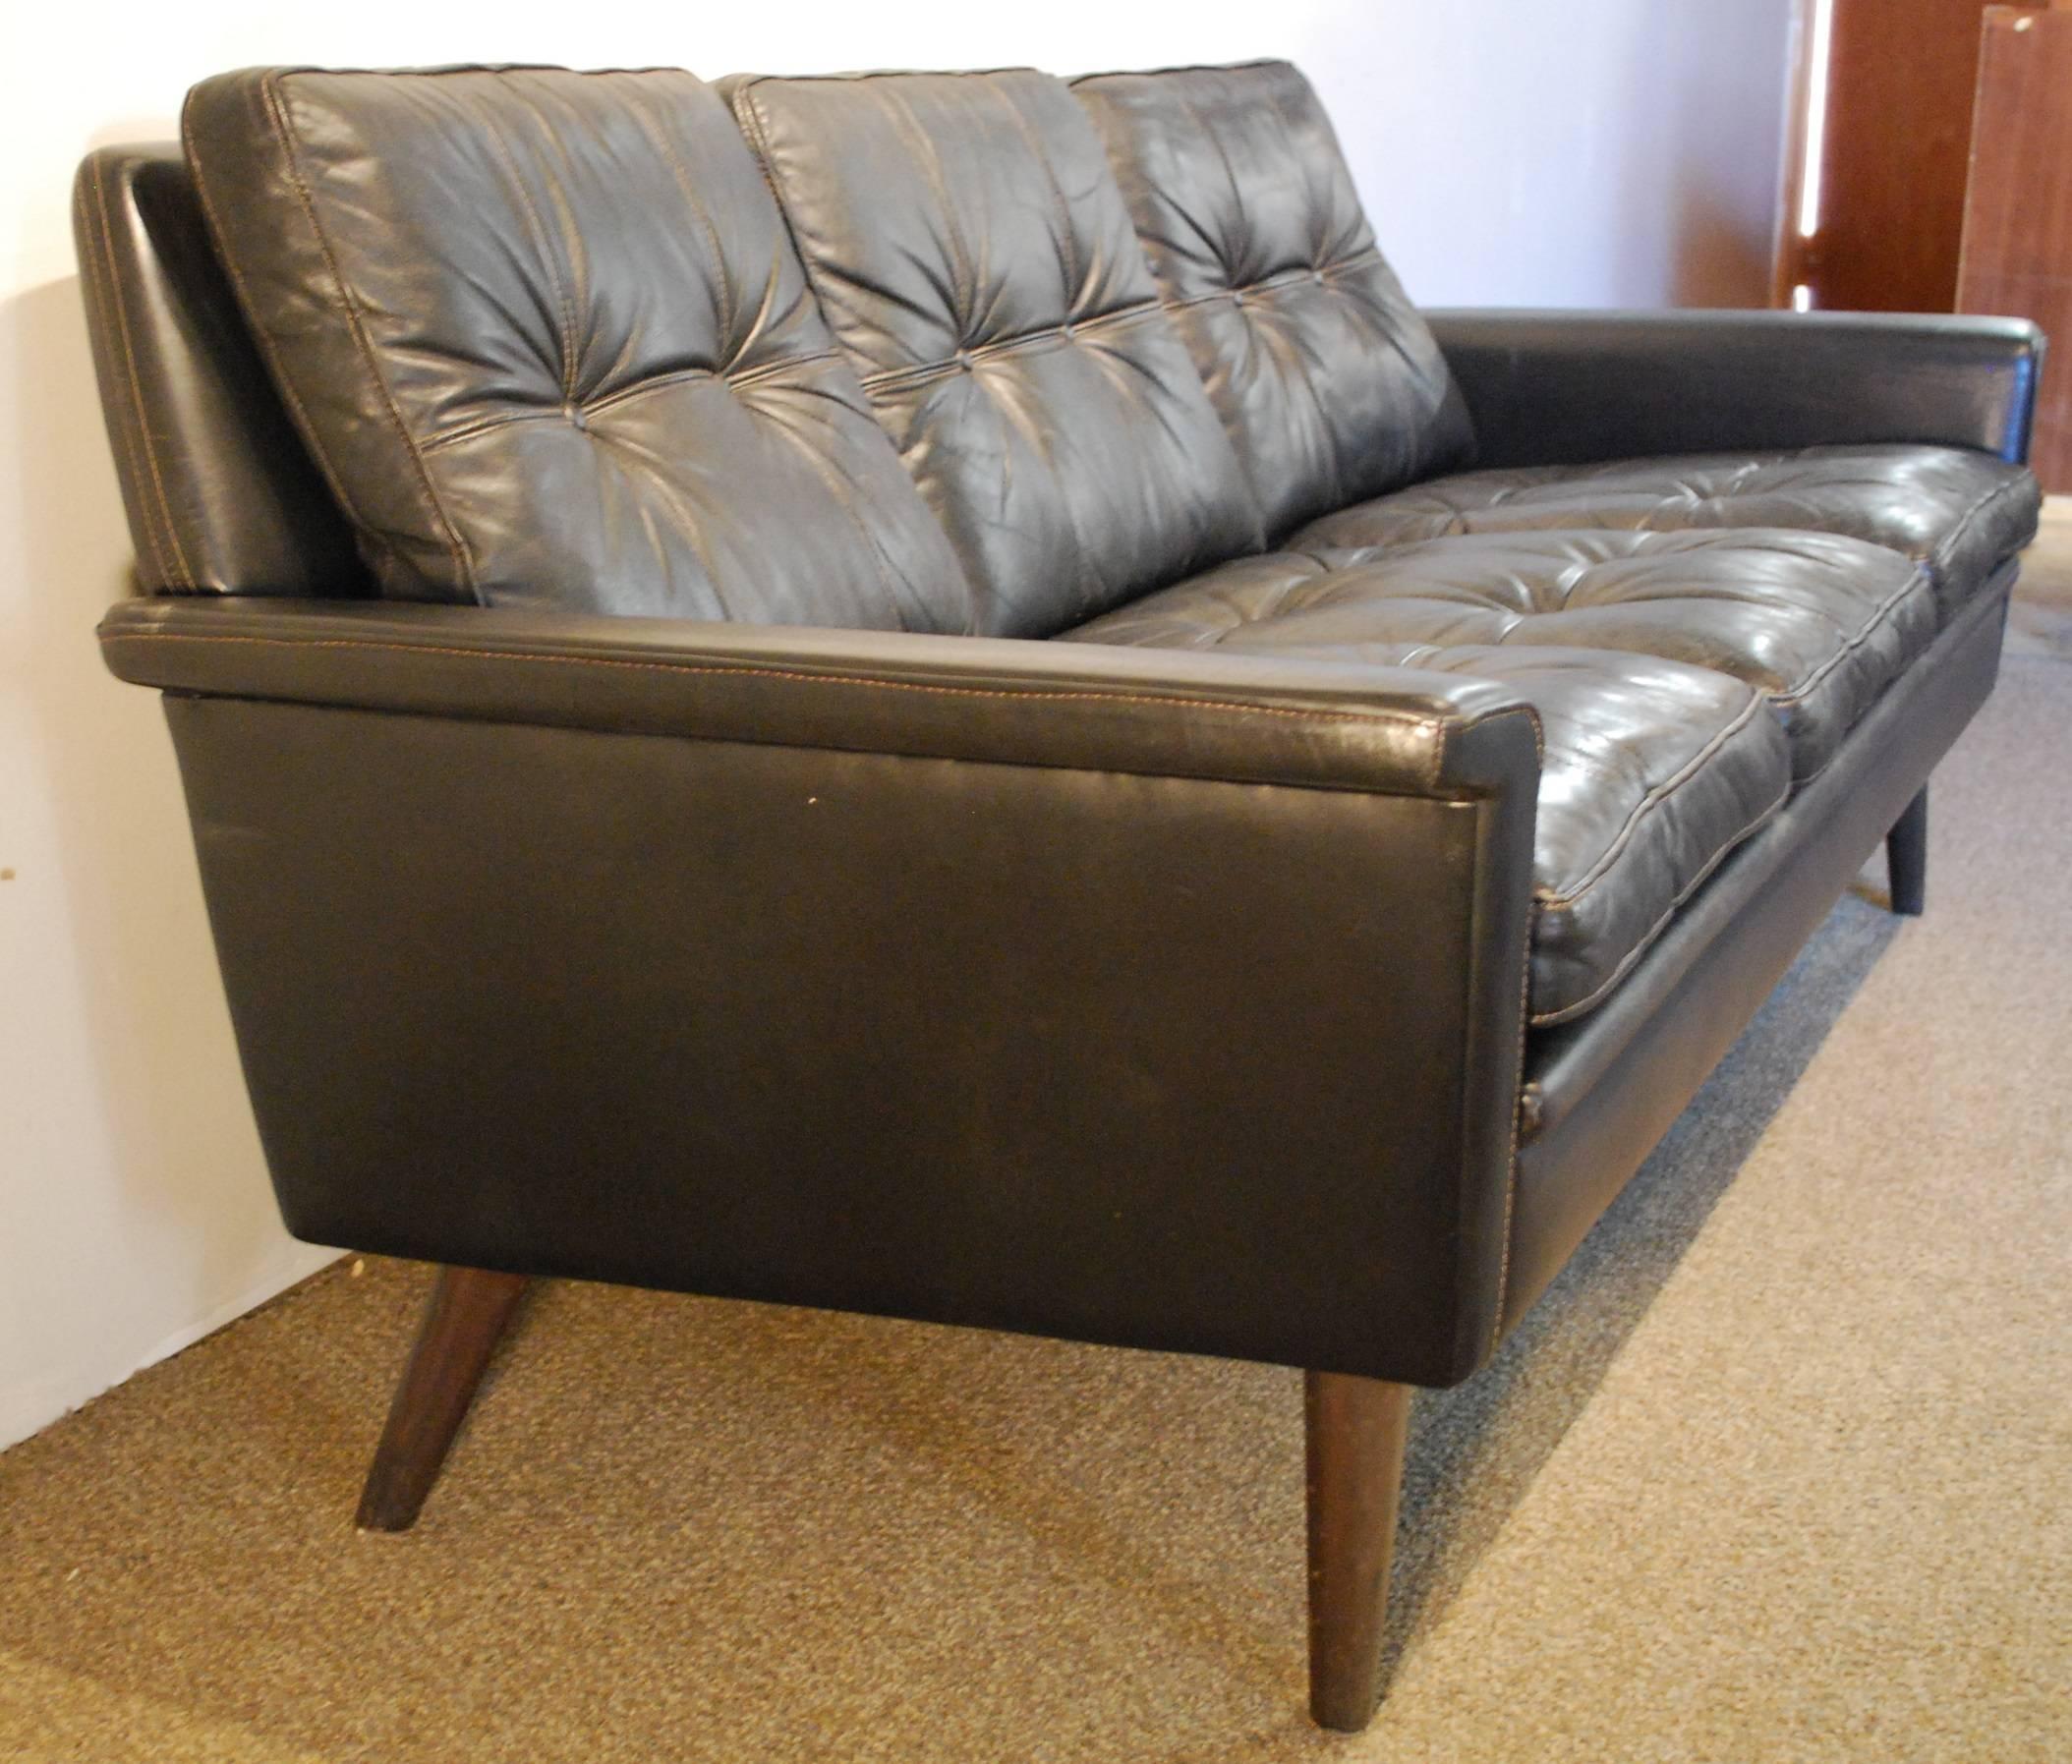 A Hans Olsen designed Danish Mid-Century Modern three-cushion sofa in black full grain leather showing button tufted seats and backrests and graceful curved armrests with contrasting stitching. Note the single hide back panel.